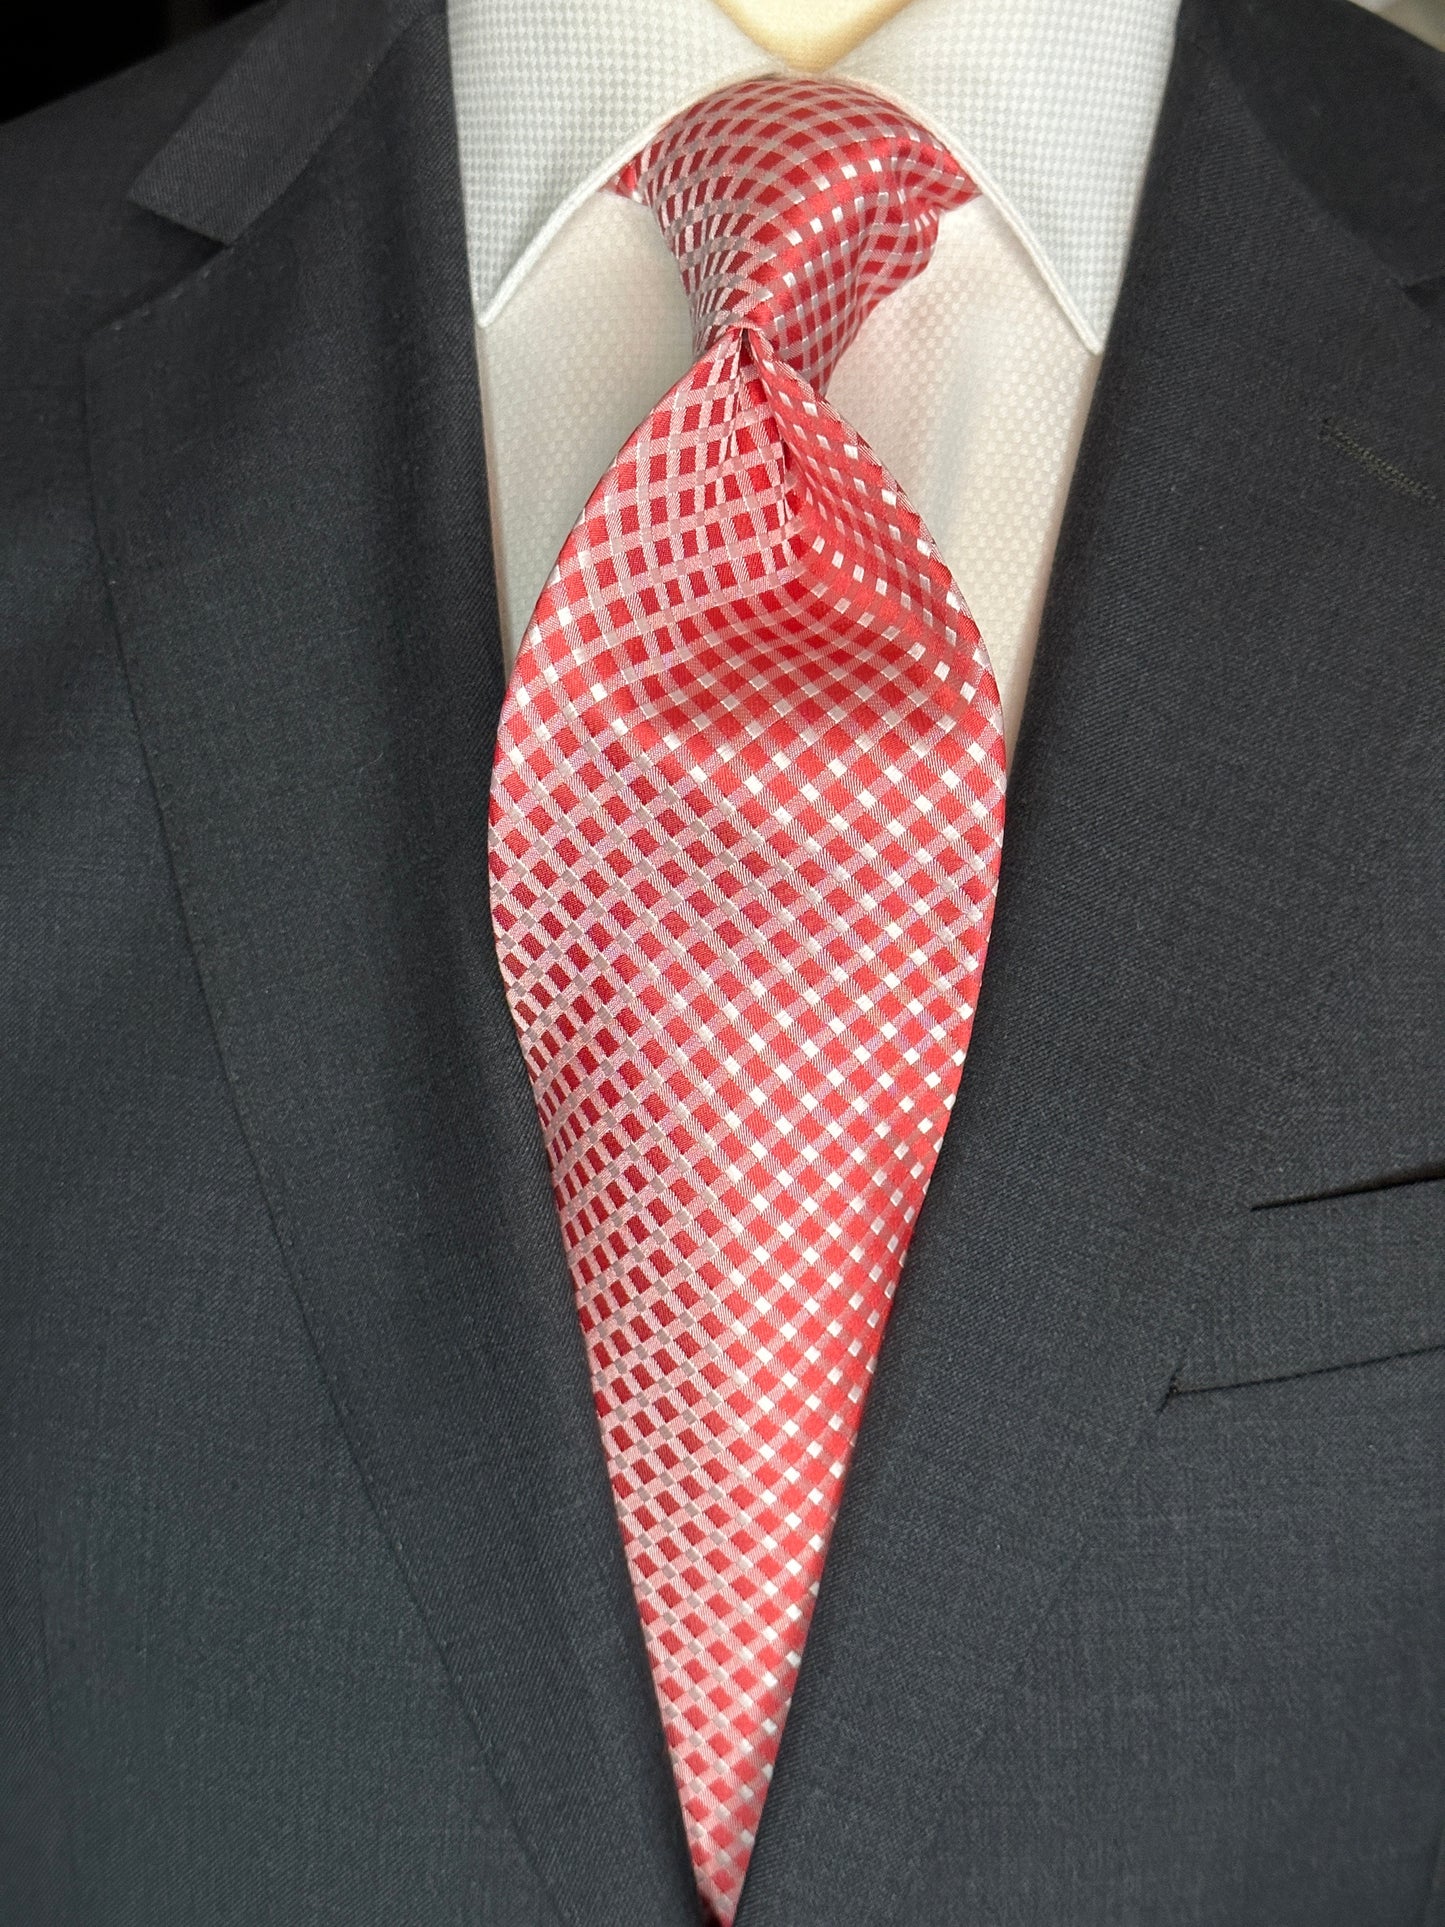 Add a touch of elegance to your wardrobe with this luxurious red silk tie. The diamond-shaped geometric lattice pattern in pale grey is meticulously woven into the fabric, creating a subtle yet sophisticated texture. The all-over pattern is composed of small squares that interlock to create a mesmerizing visual effect. This tie is crafted from the finest silk, ensuring that it will be a timeless addition to any collection.